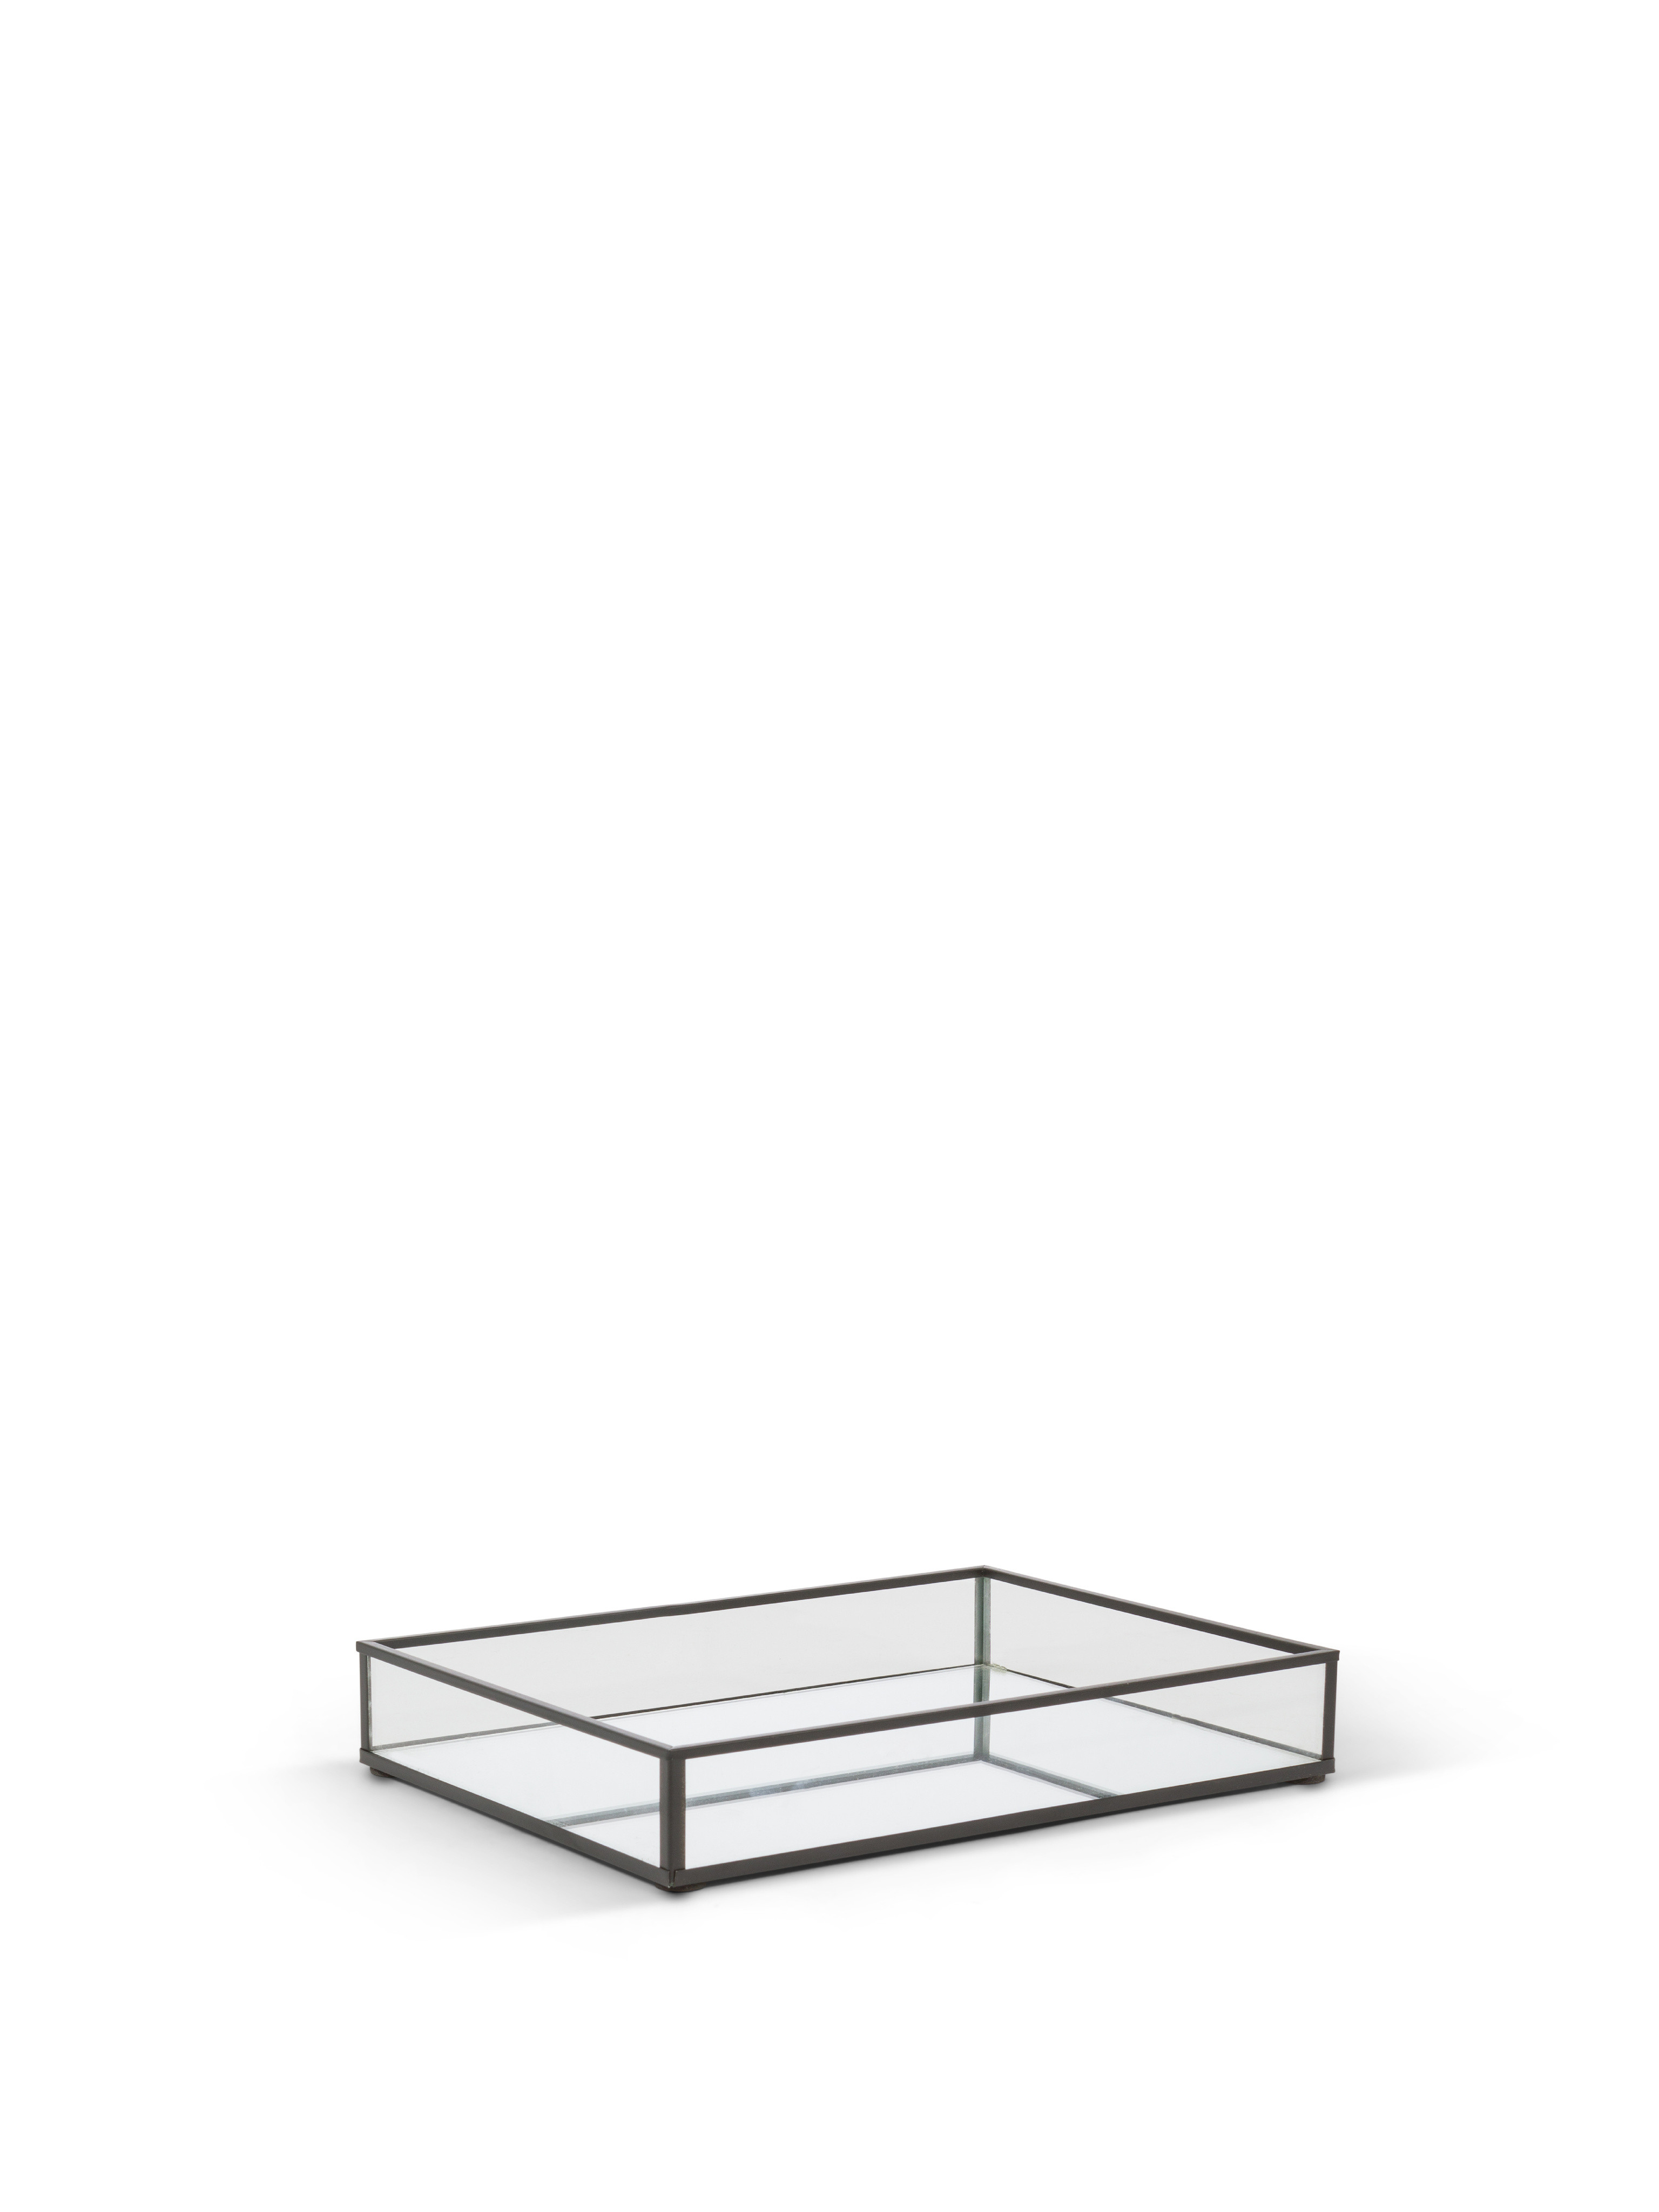 Decorative glass tray with black edges, Black, large image number 0